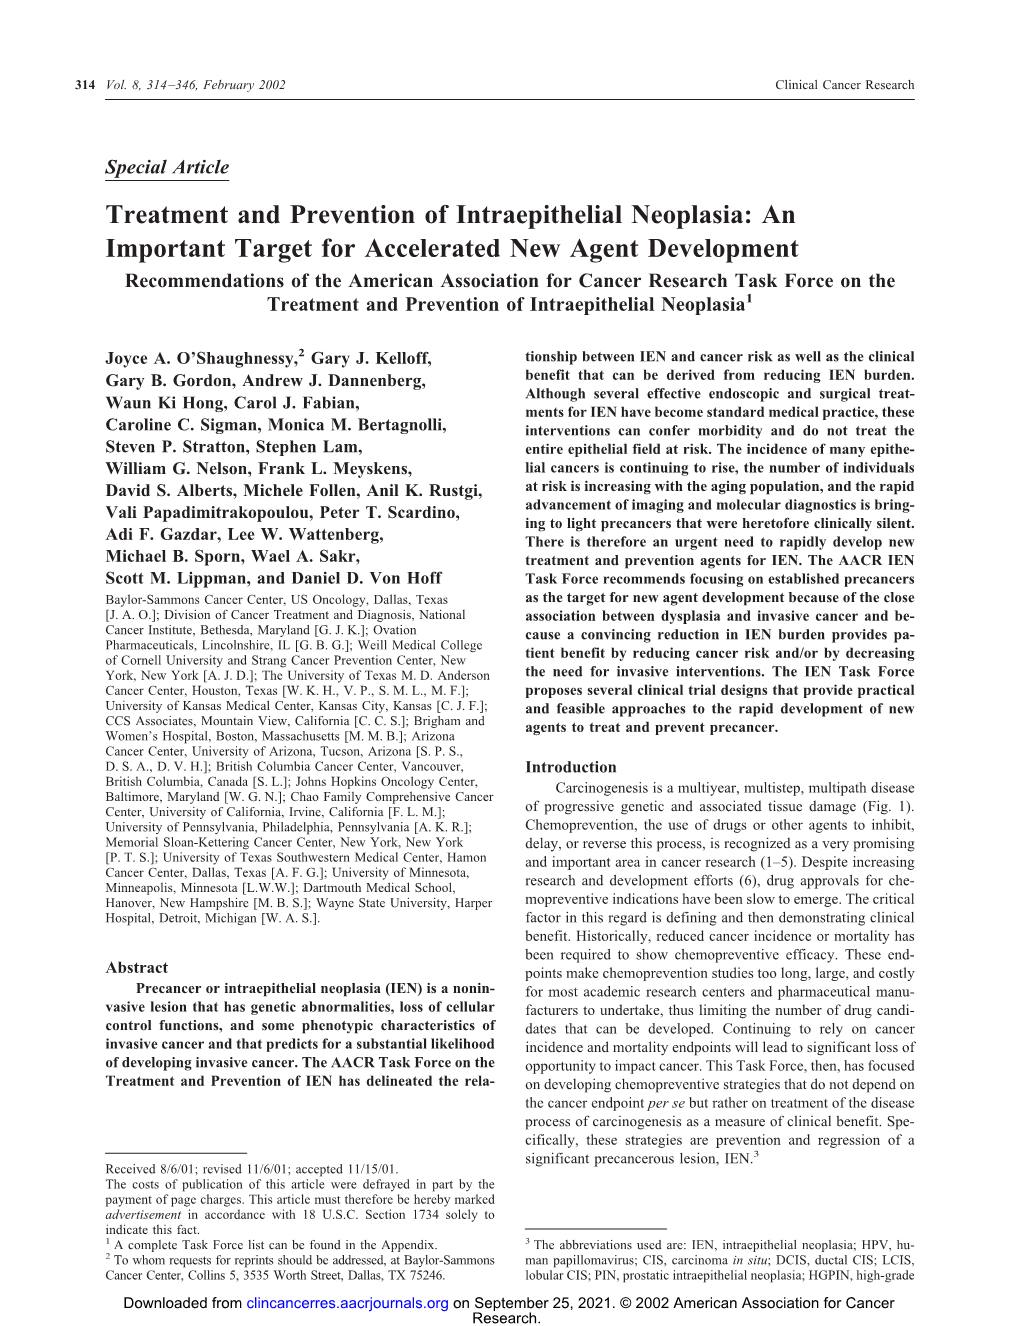 Treatment and Prevention of Intraepithelial Neoplasia: an Important